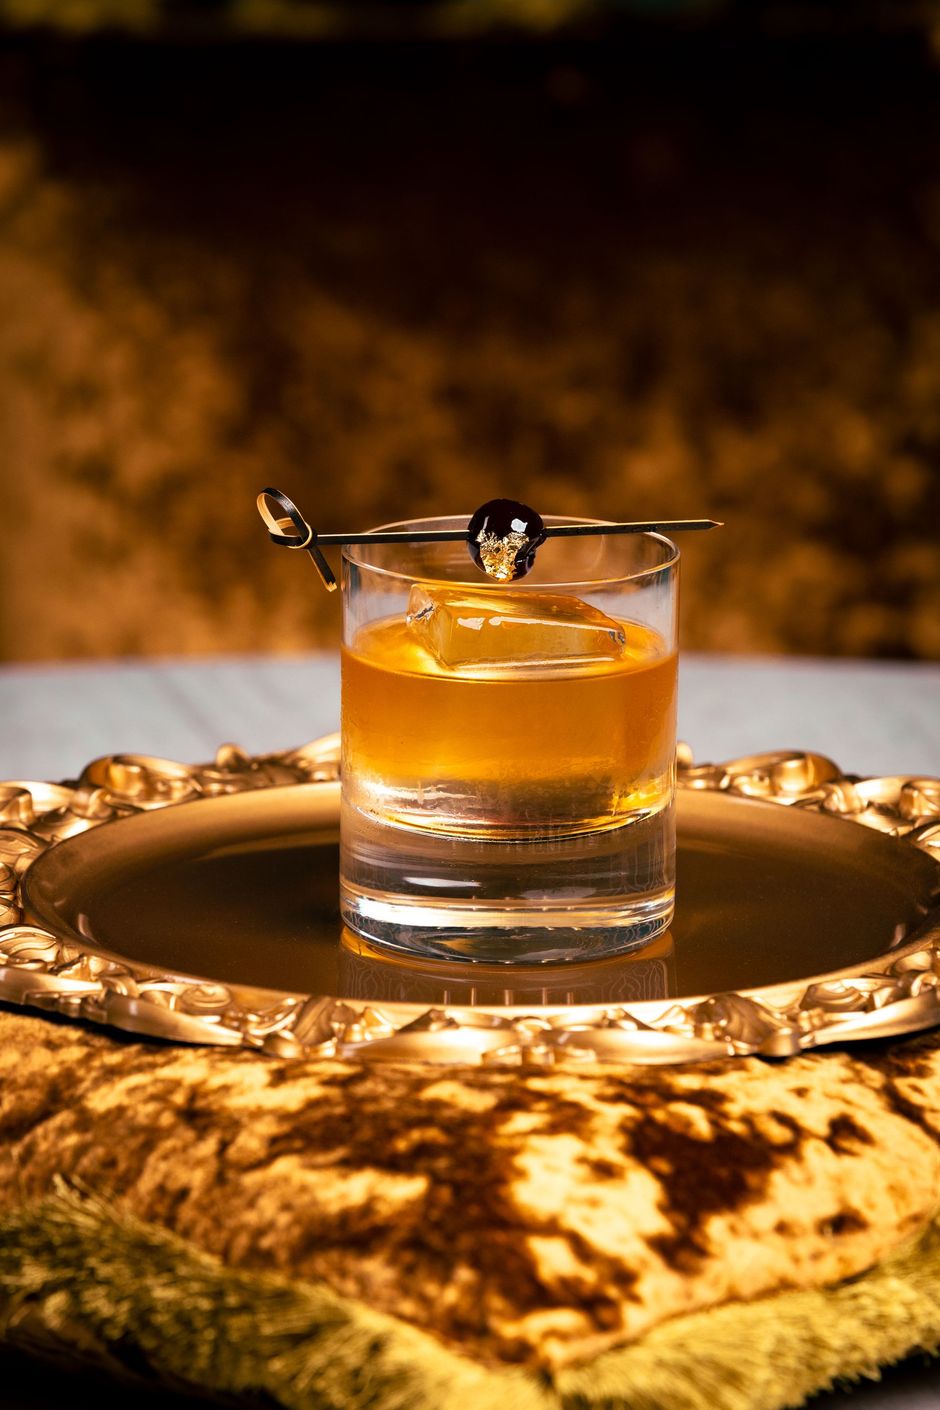 Royal Elixir whiskey based drink served on a gold plate